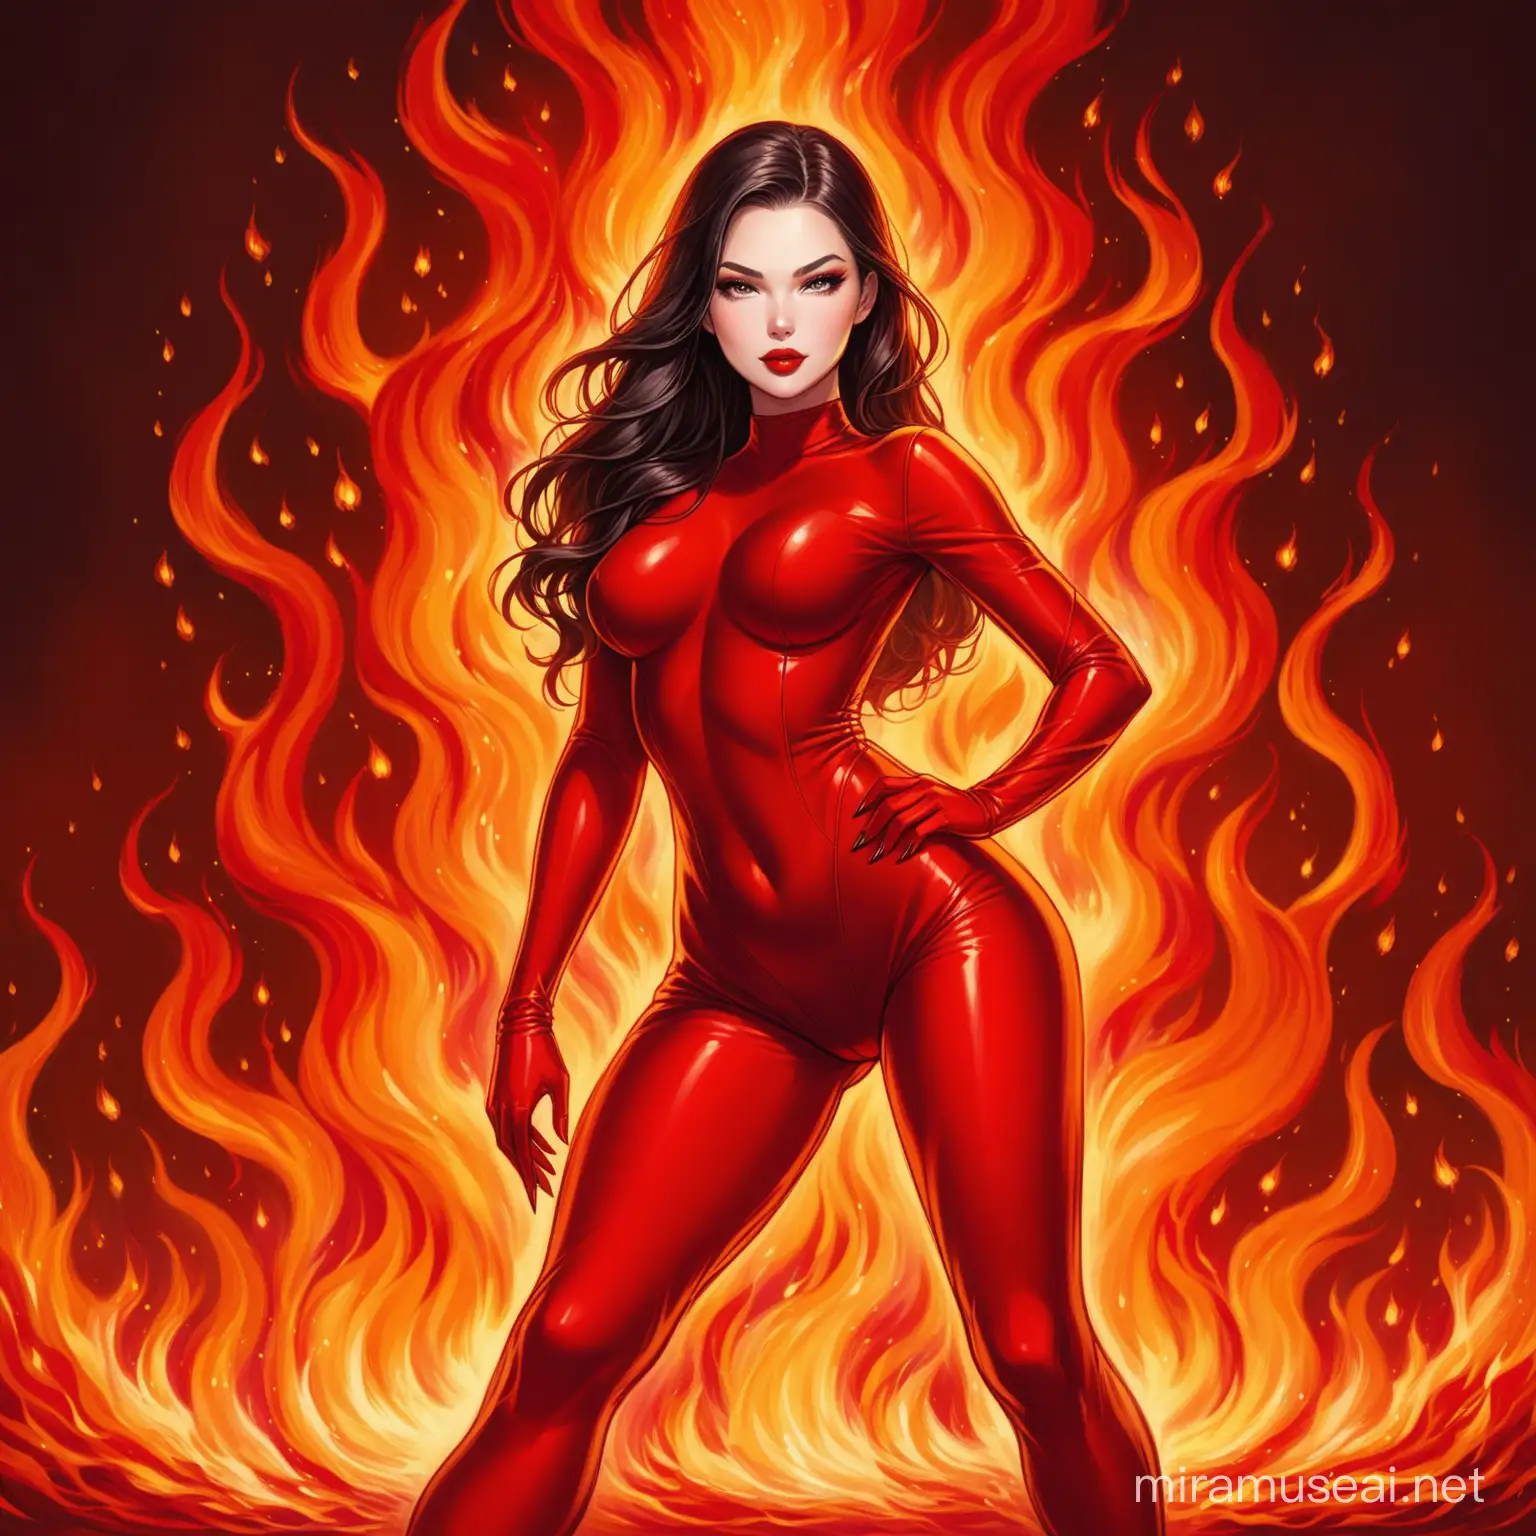 Fiery Red Outfit Glamorous Woman Amidst Flames